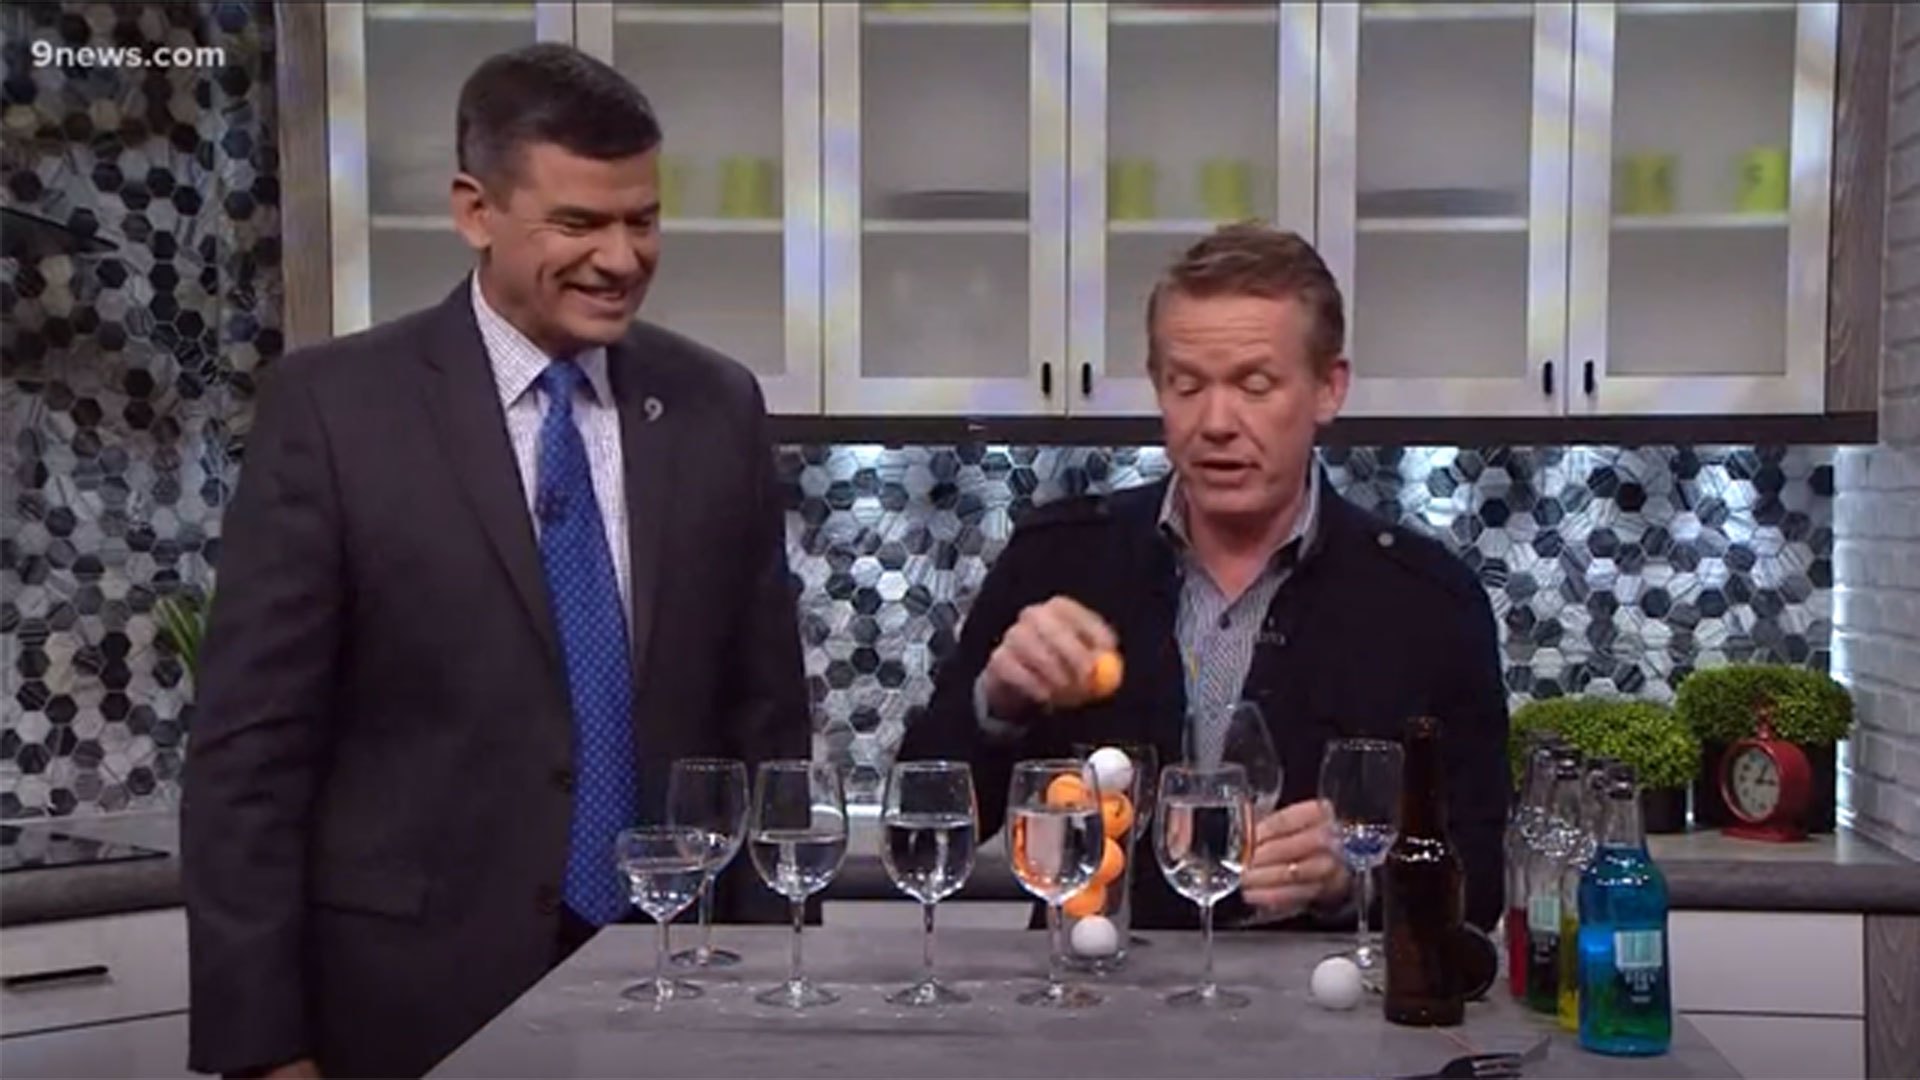 When it comes to getting ready for Thanksgiving, the focus is always on eating the food... not playing with your food. That's unless you're Steve Spangler. Our science guy has great ideas to keep your guests entertained while you prepare the feast.